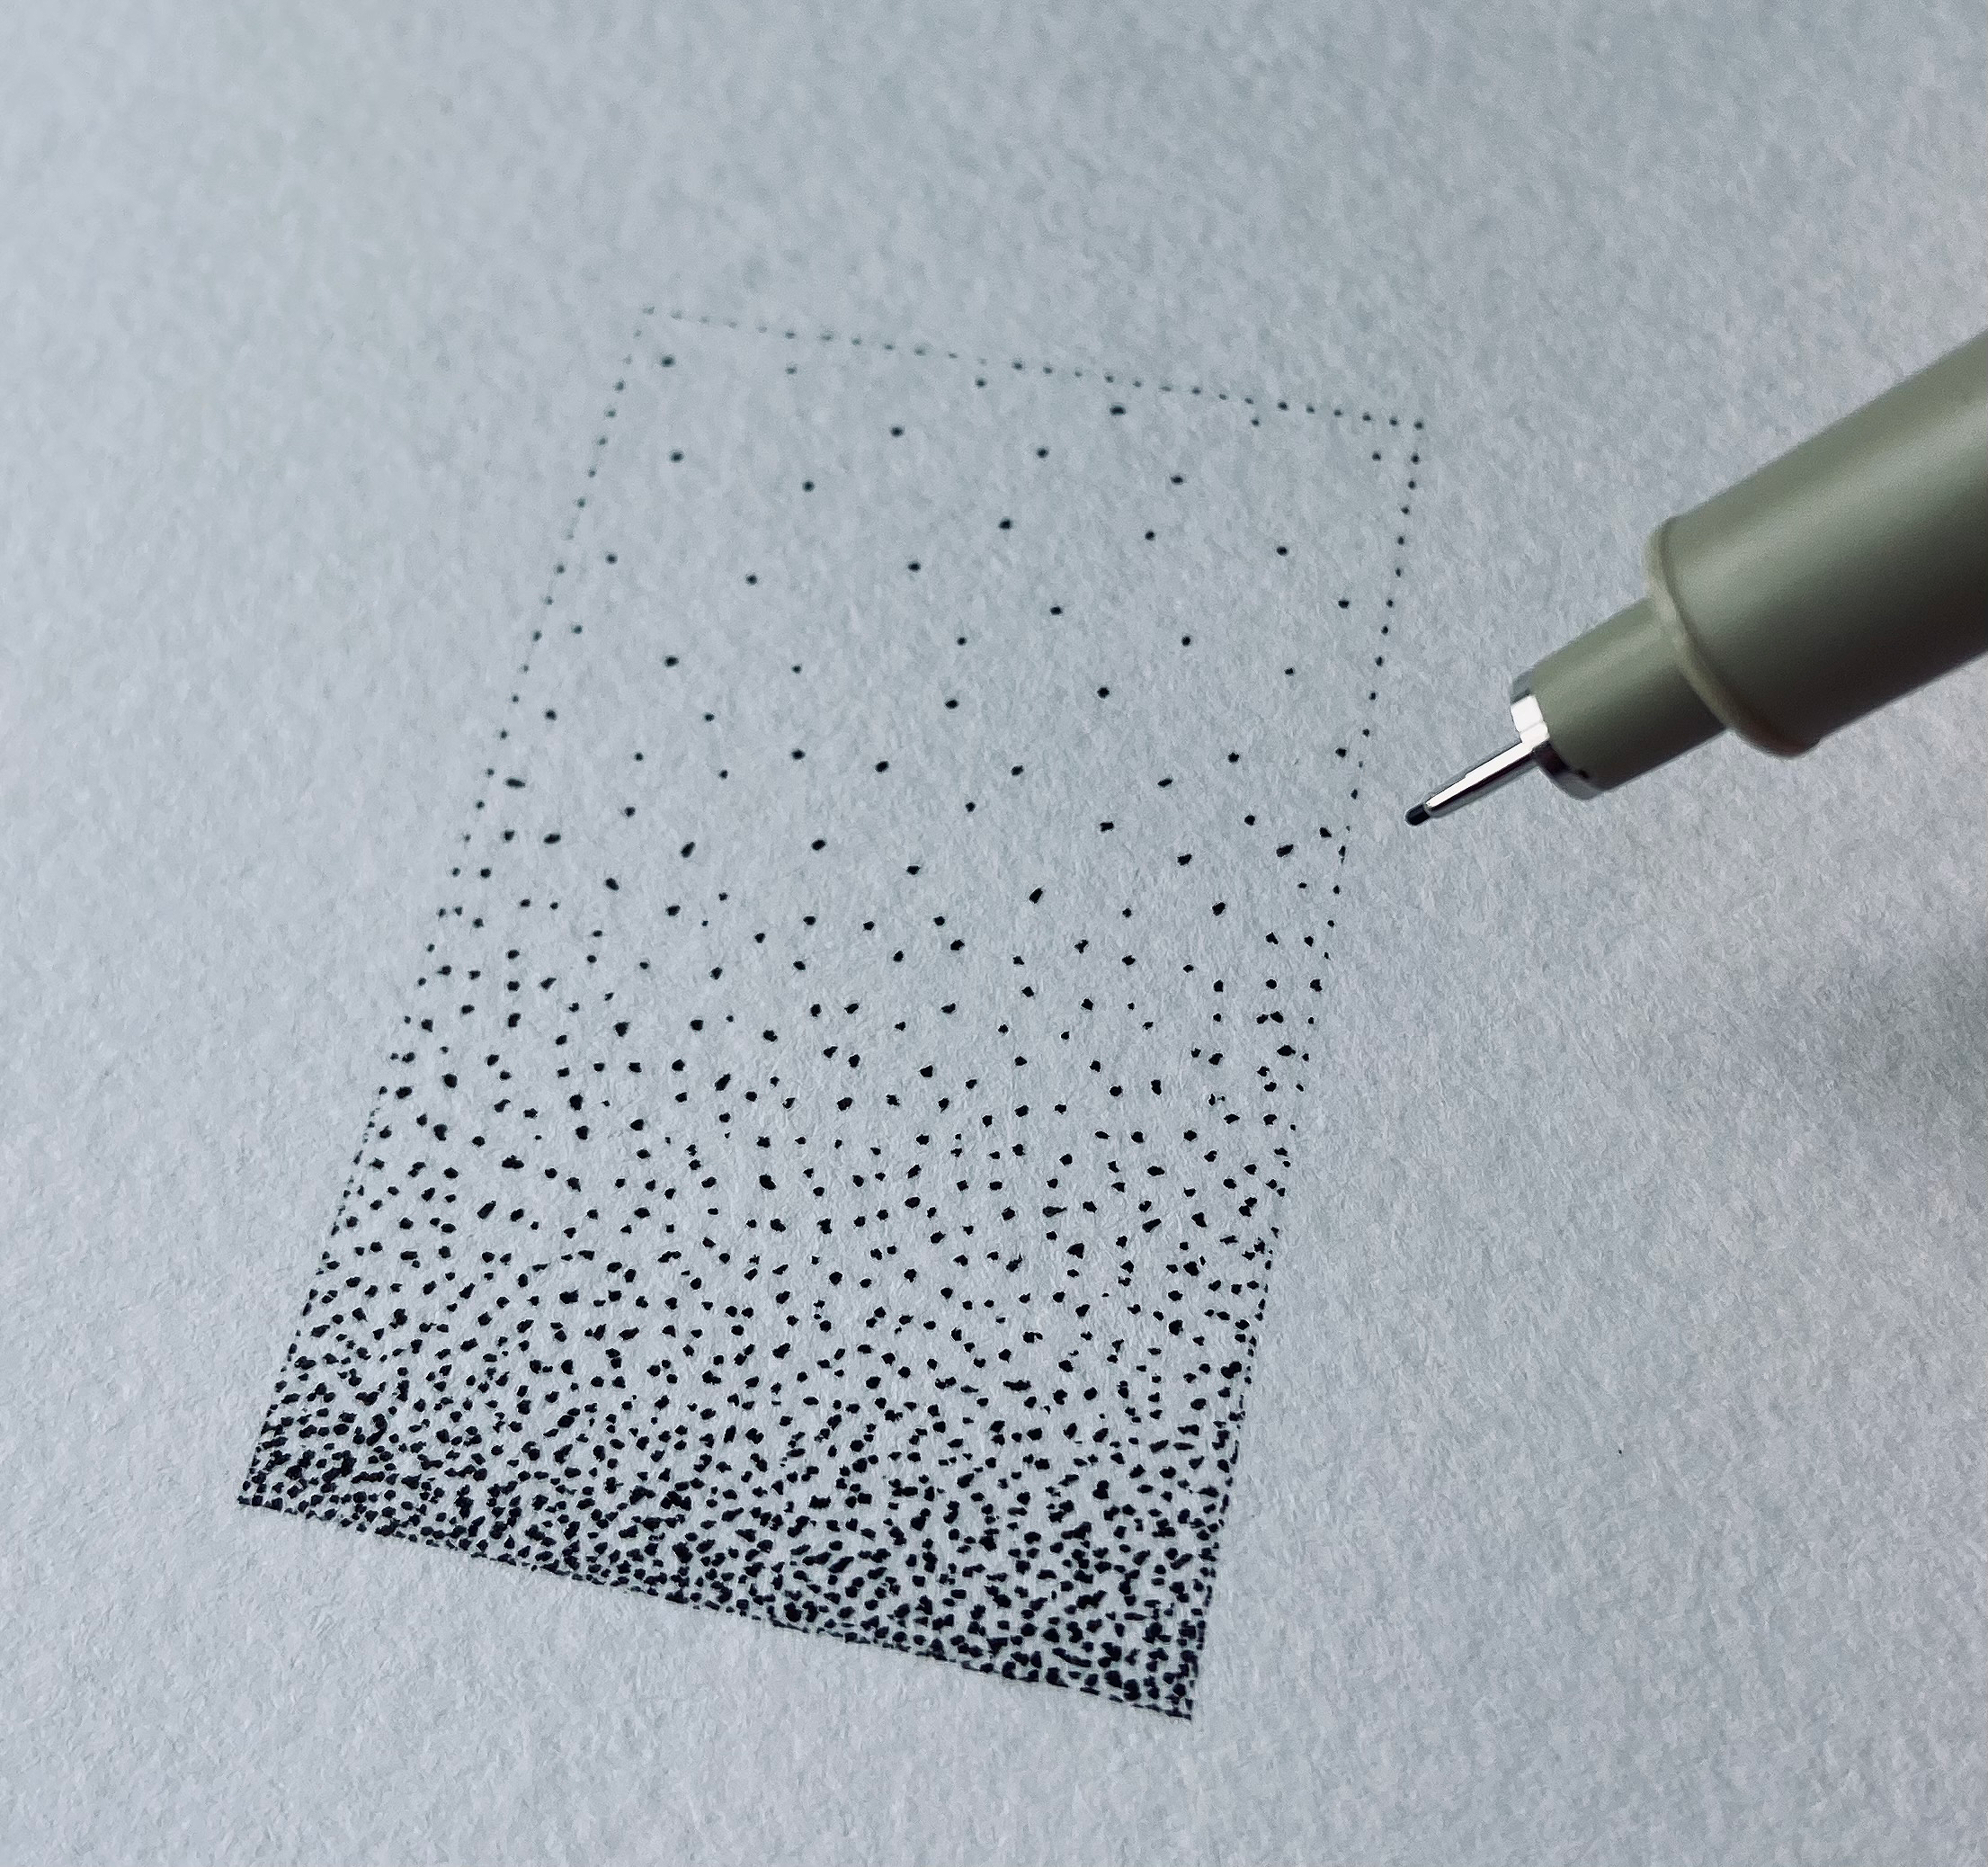 How To Use A White Pen: 10 Tips and Tricks for Beginner Artists